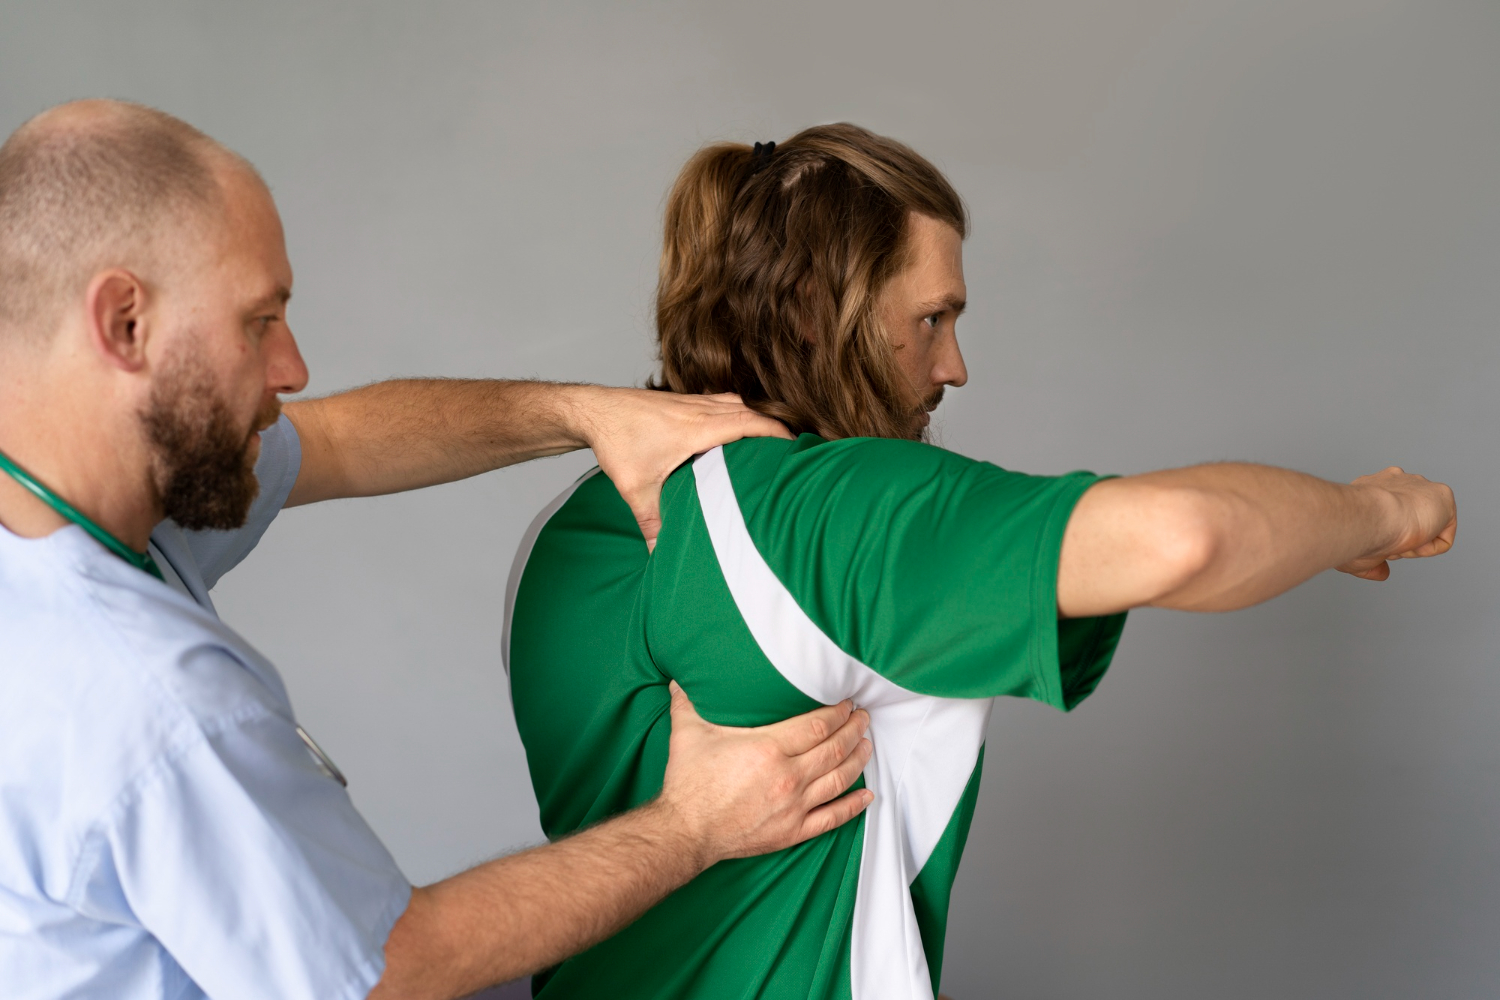 physical therapy exercises for shoulder pain